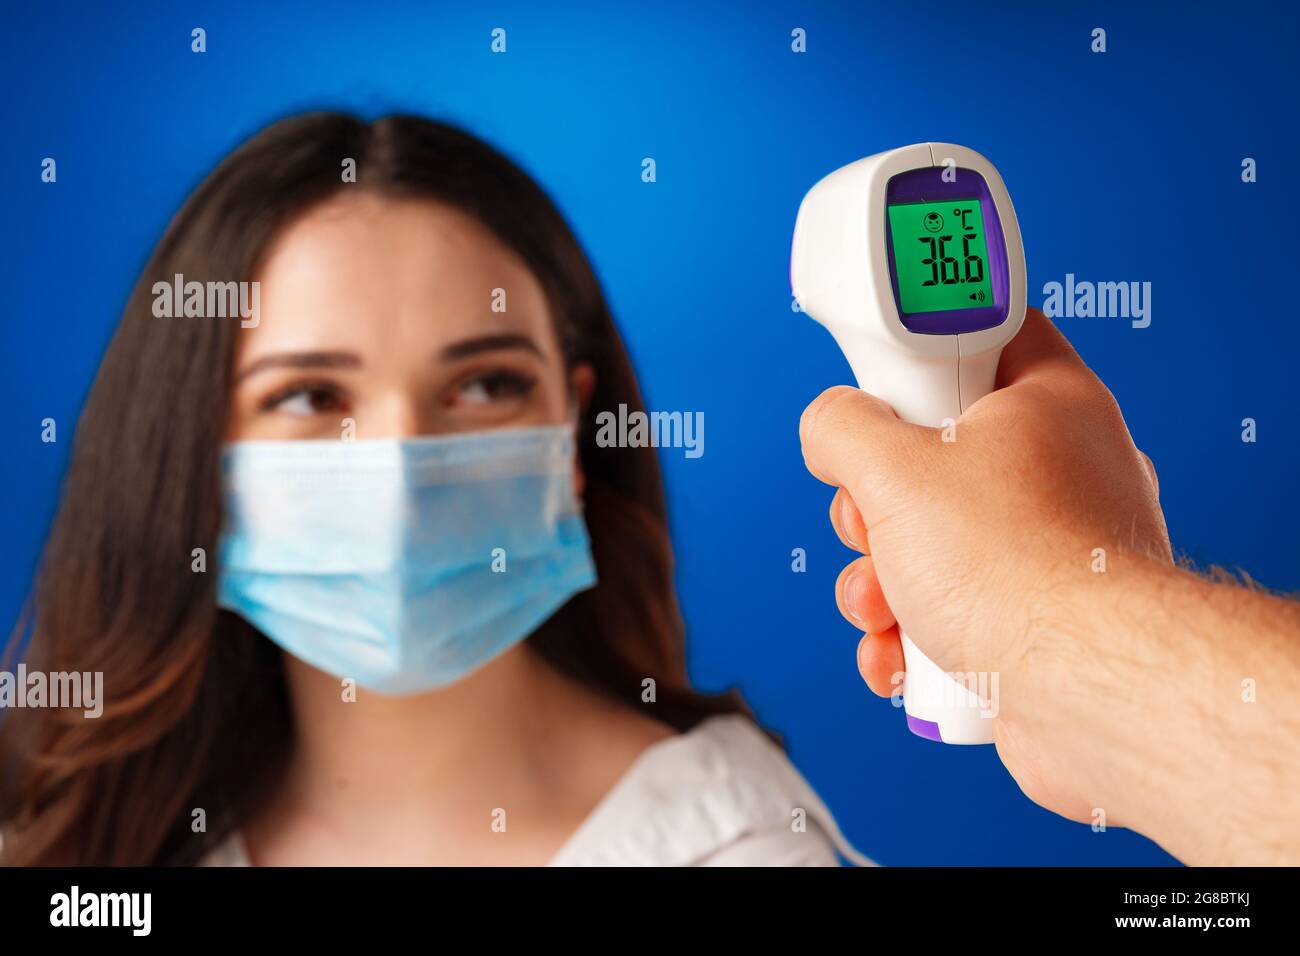 brunette woman getting temperature screening with infrared thermometer against blue background 2G8BTKJ